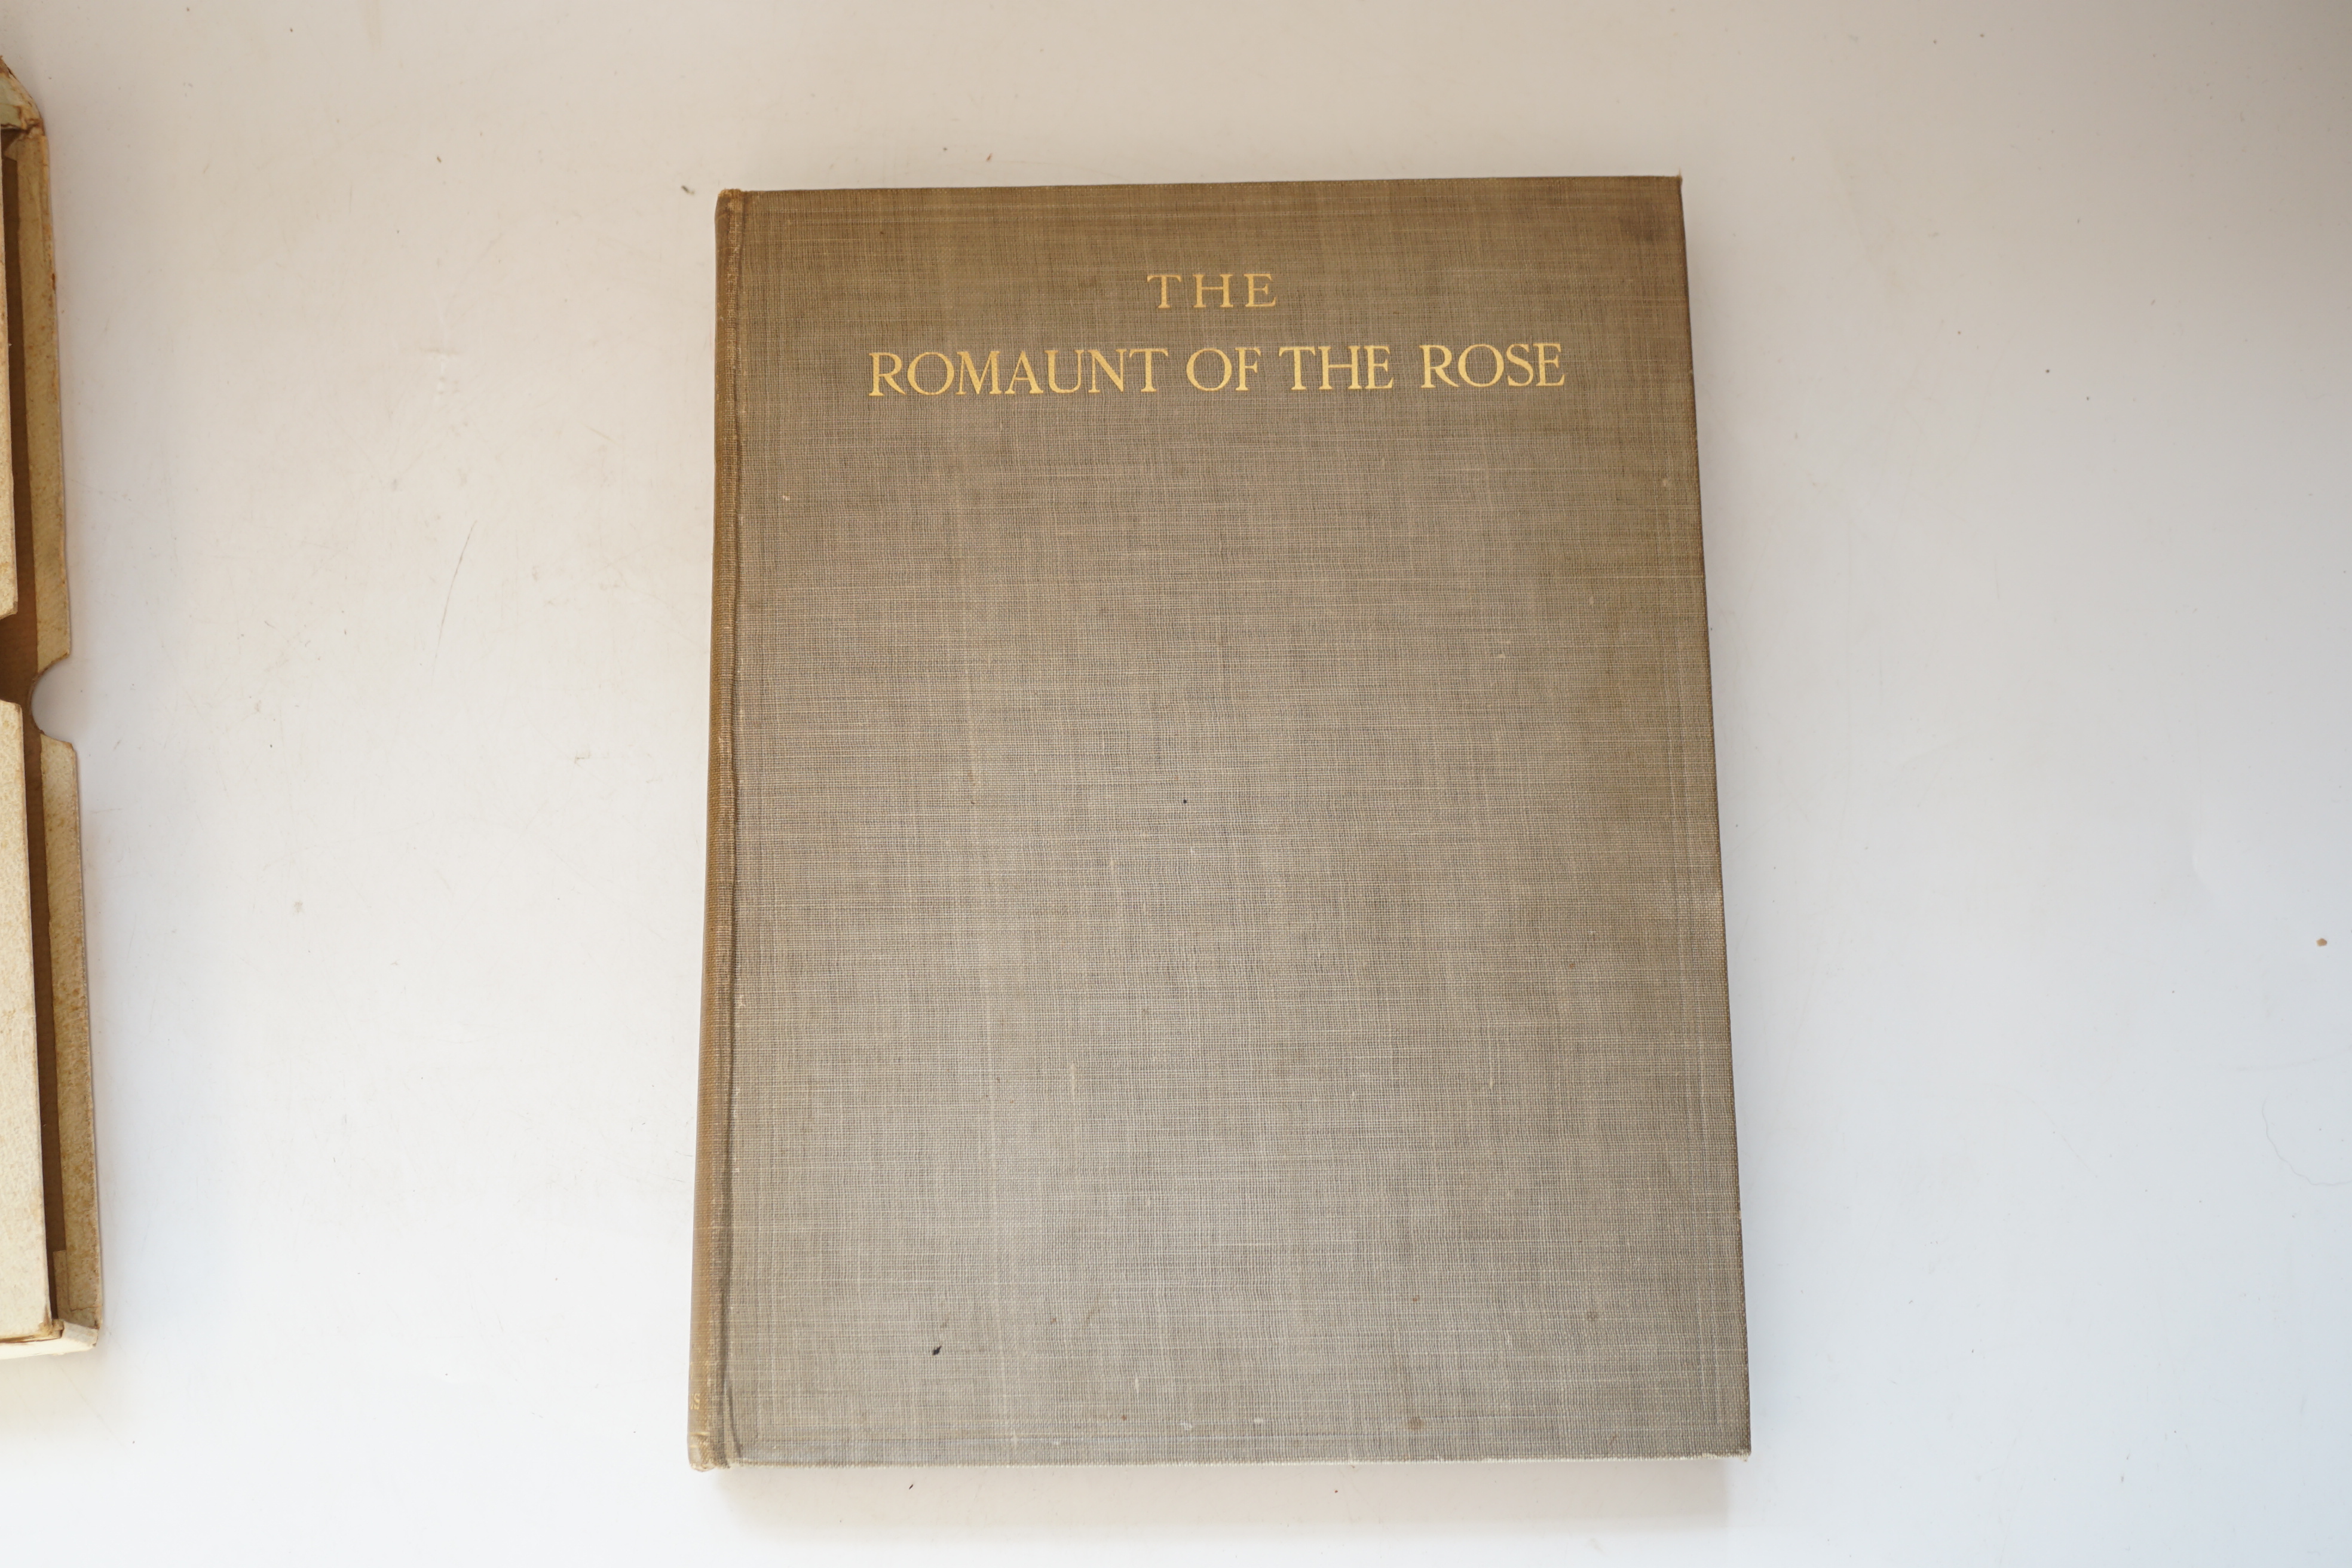 [Lorris, Guillaume de], Chaucer, Geoffrey (translator) - The Romaunt of the Rose, title and first page in red and black, 20 mounted colour plates by Keith Henderson and Norman Wilkinson, ink inscription on front free end